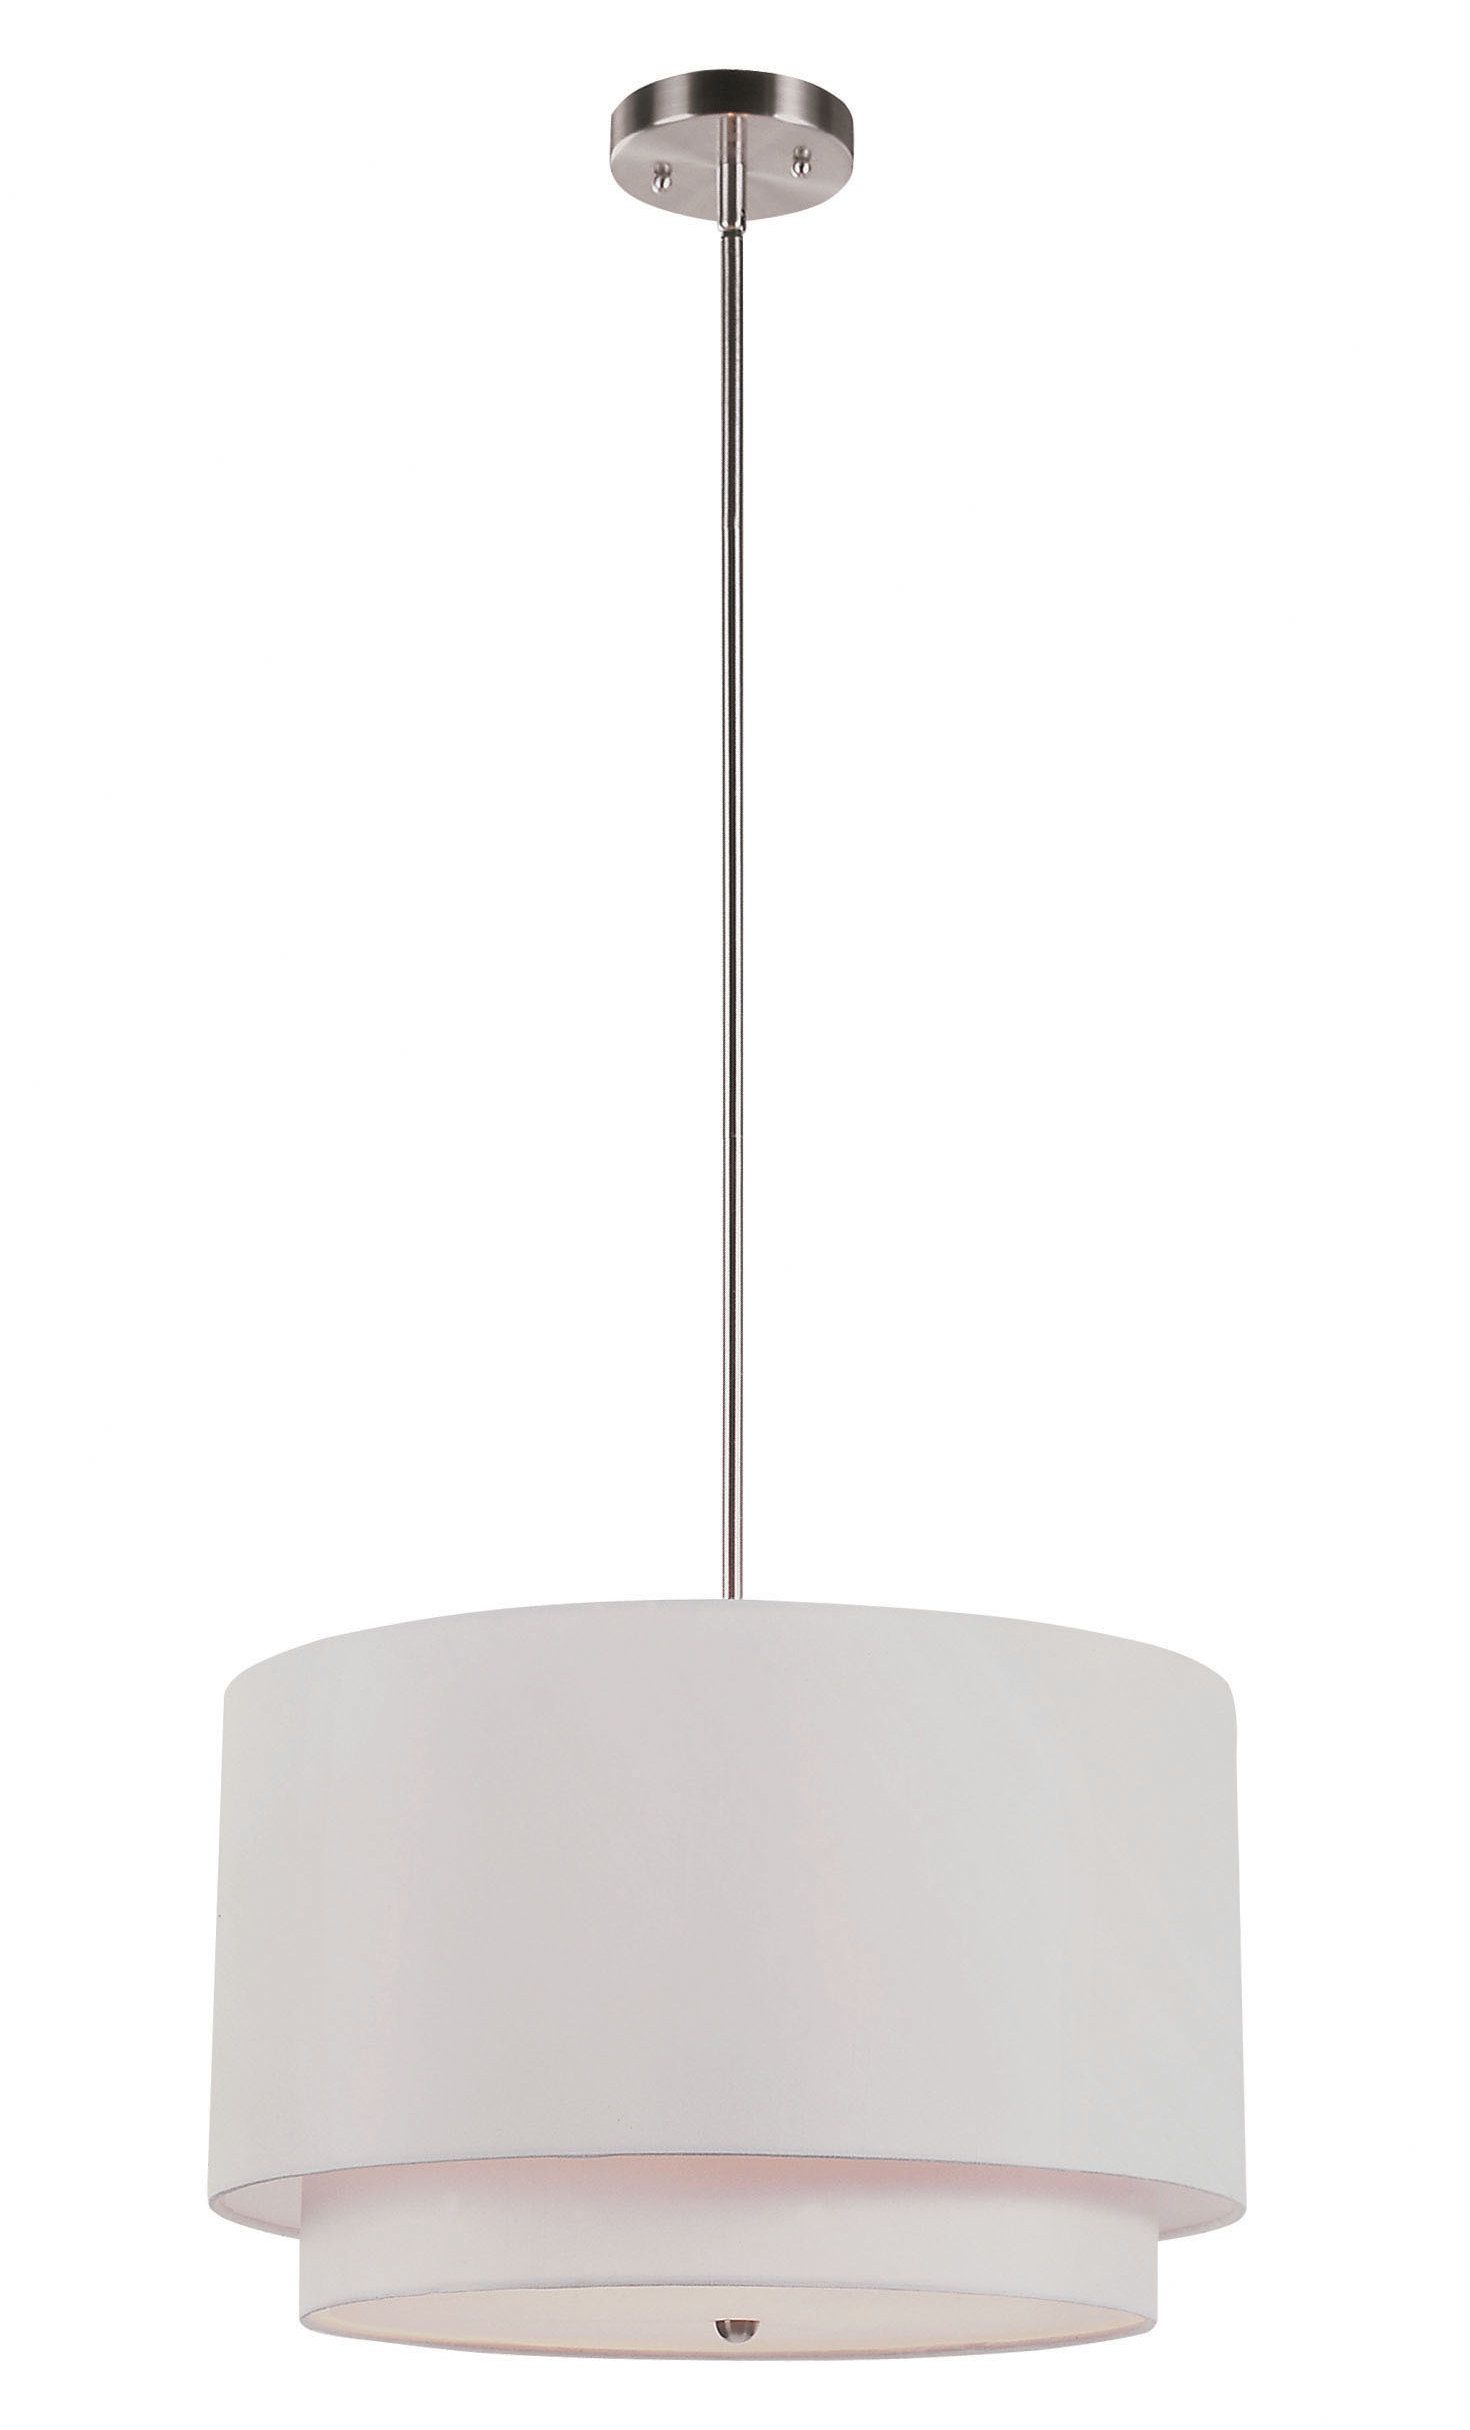 Friedland 3 Light Drum Tiered Pendant Within Kasey 3 Light Single Drum Pendants (View 4 of 30)